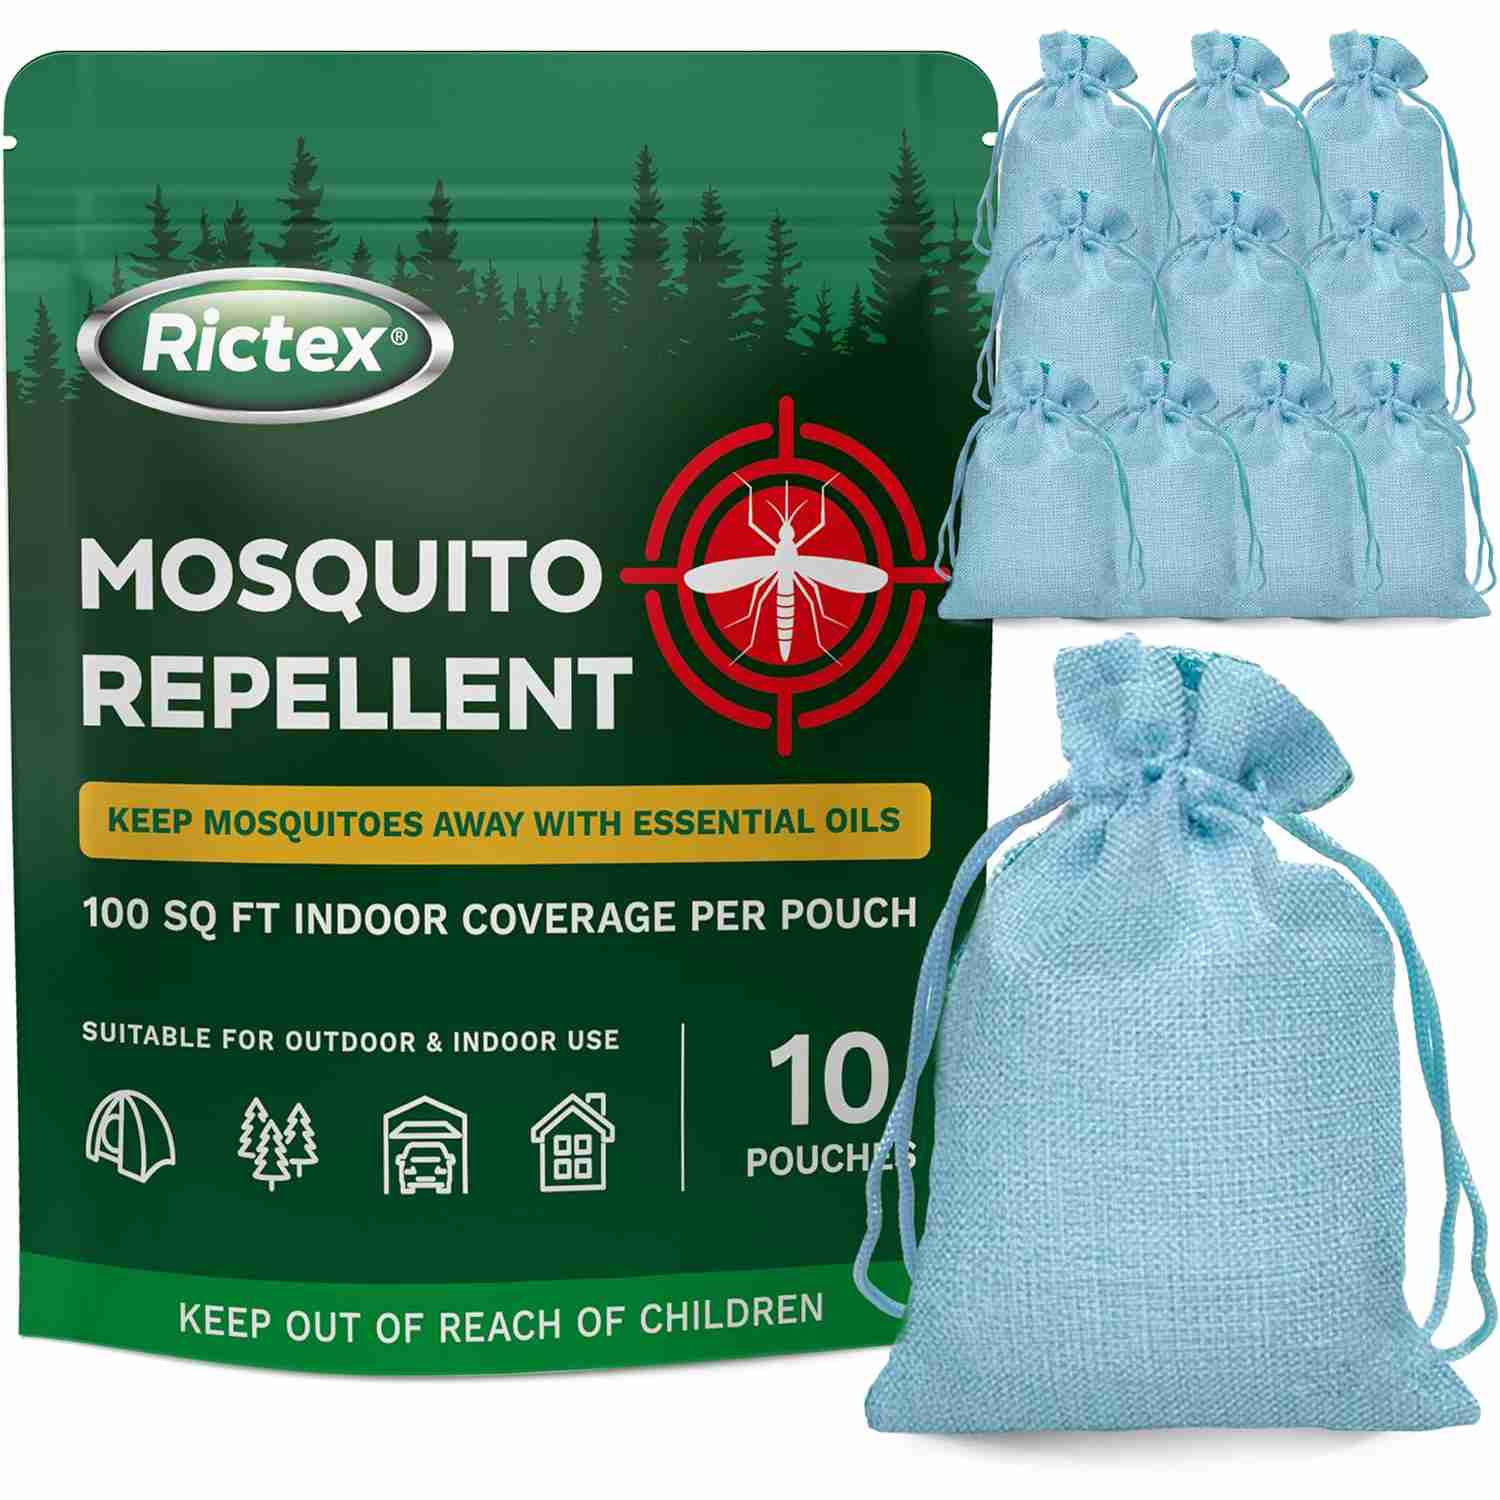 mosquito-repellent-outdoor-b0cfsq9tdq with cash back rebate